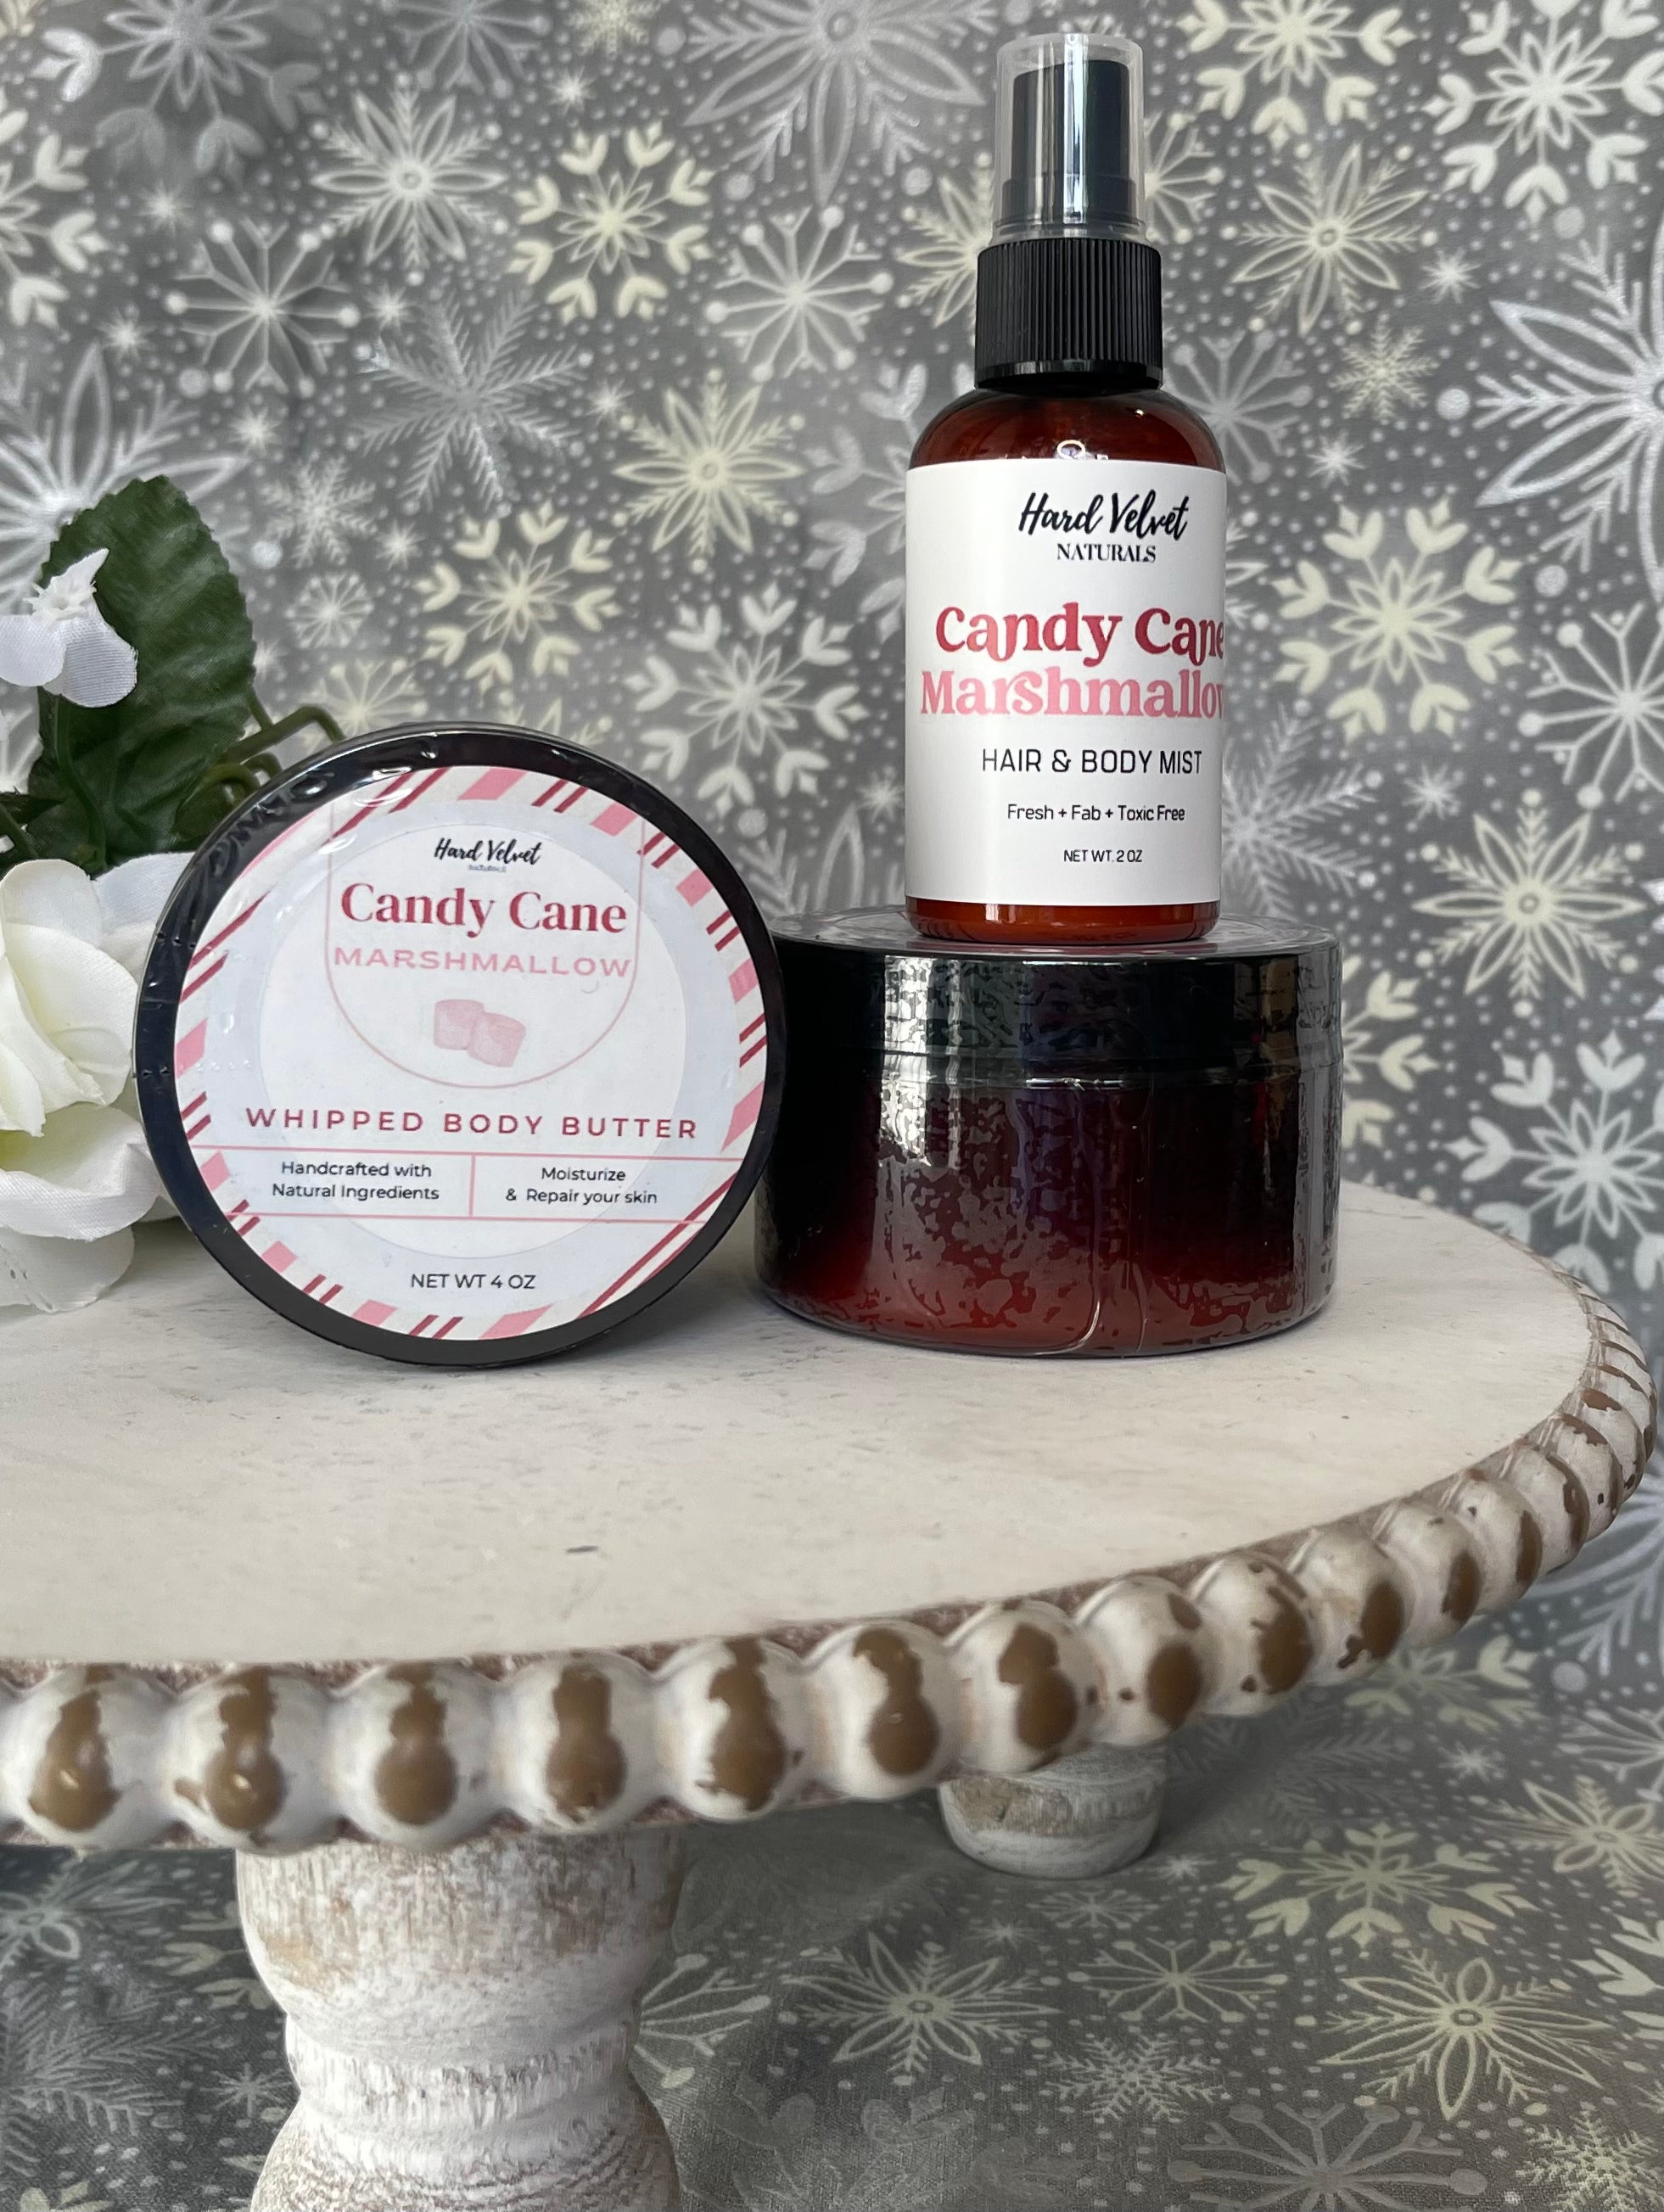 Candy Cane Marshmallow Whipped Body Butter